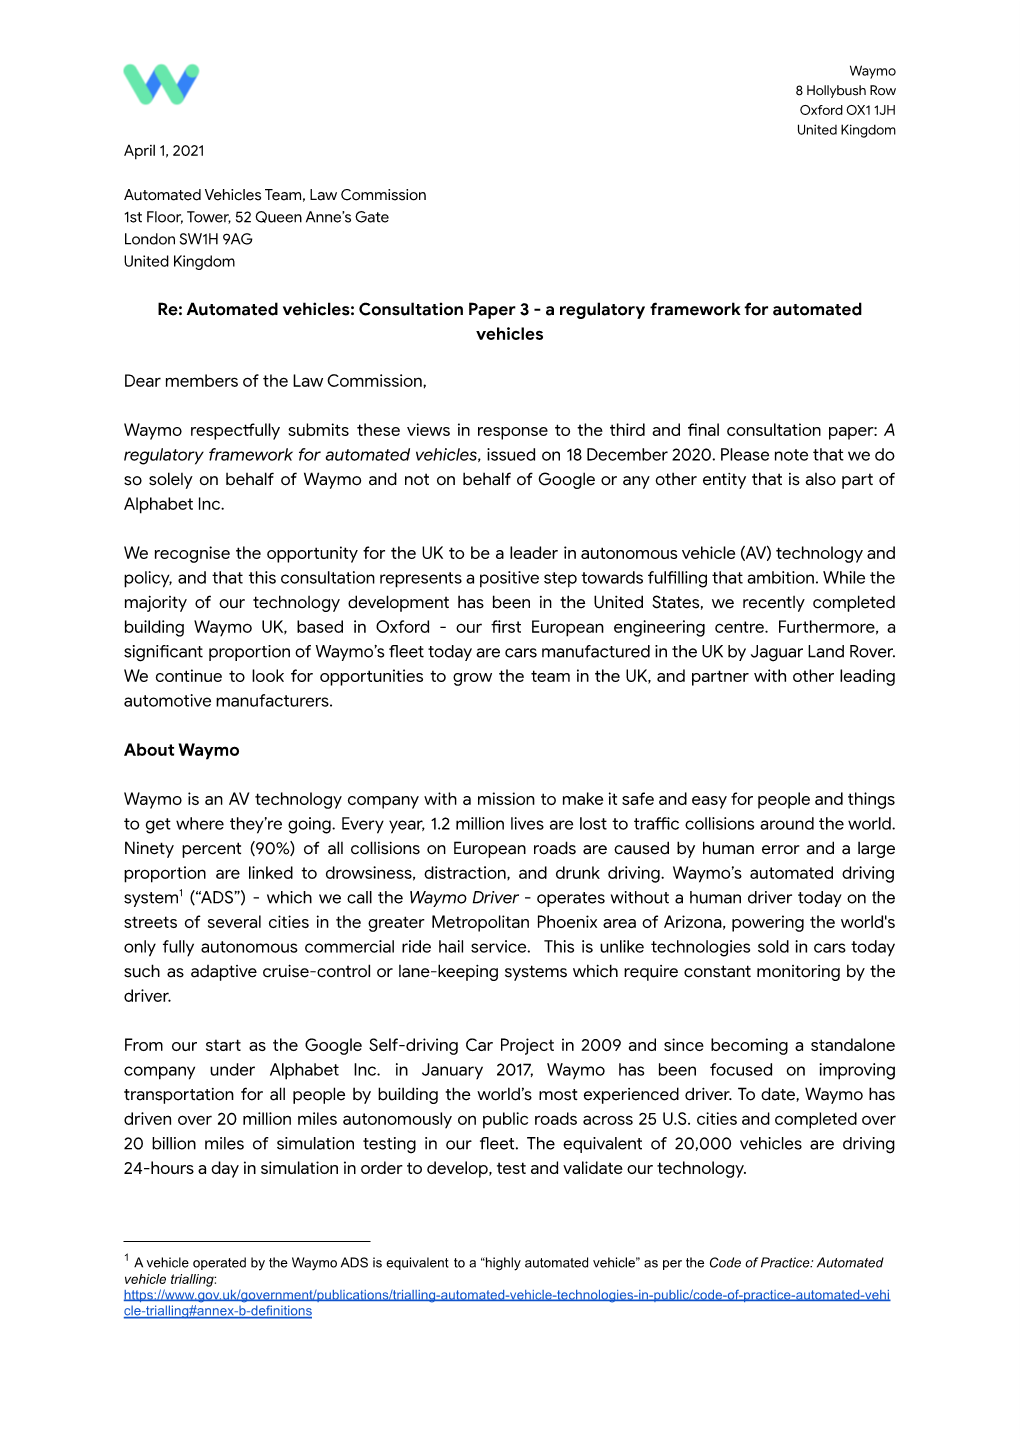 Waymo Submission to Law Commission Automated Vehicles Consultation Paper 3